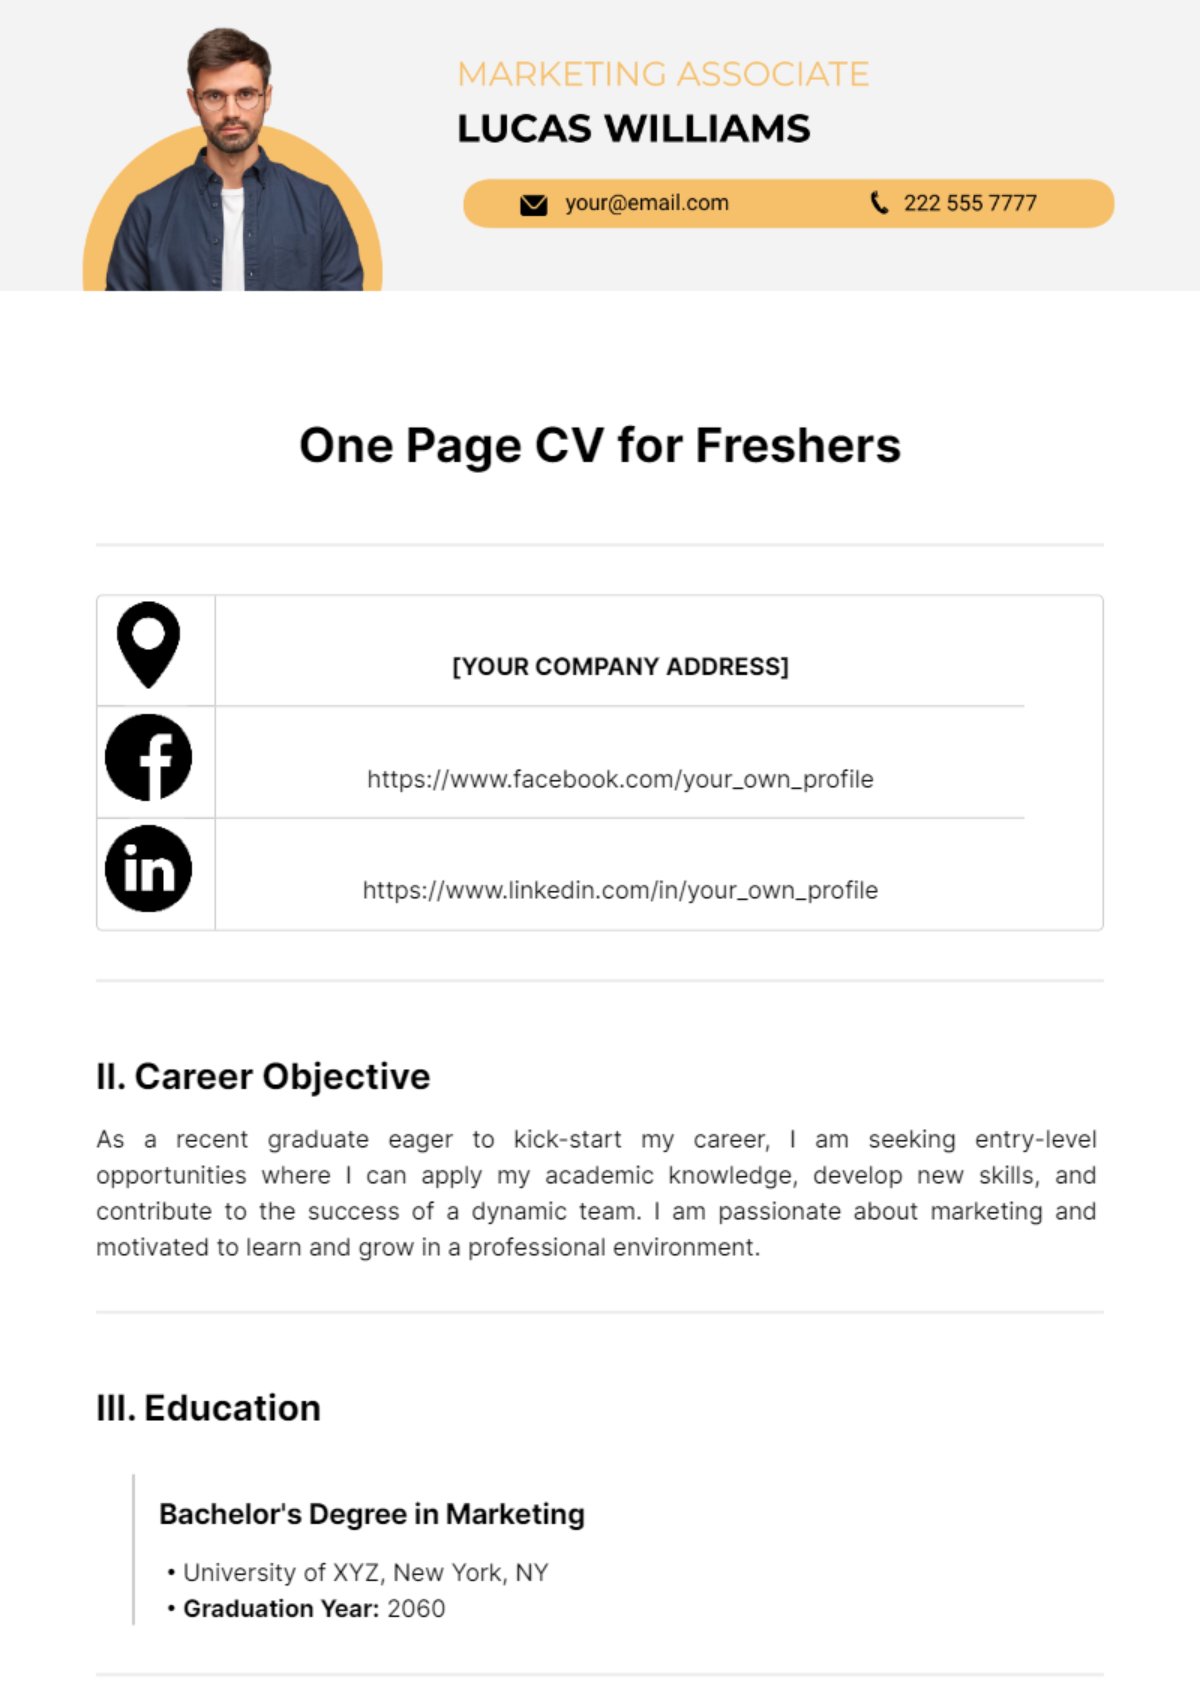 One Page CV for Freshers Template